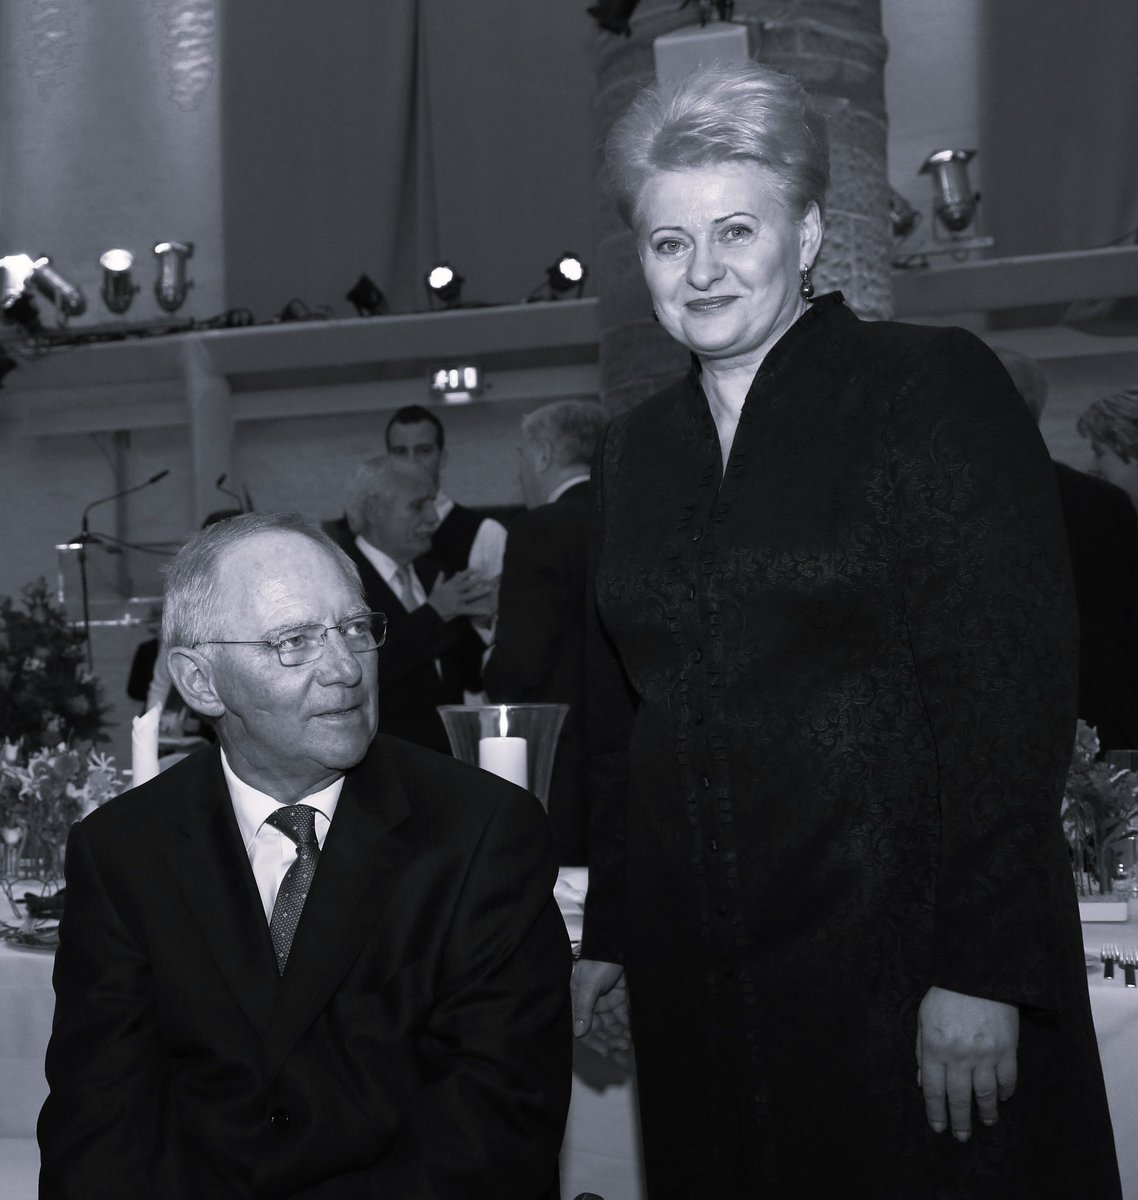 We bid farewell to the great German Statesman and formidable European Wolfgang Schauble.